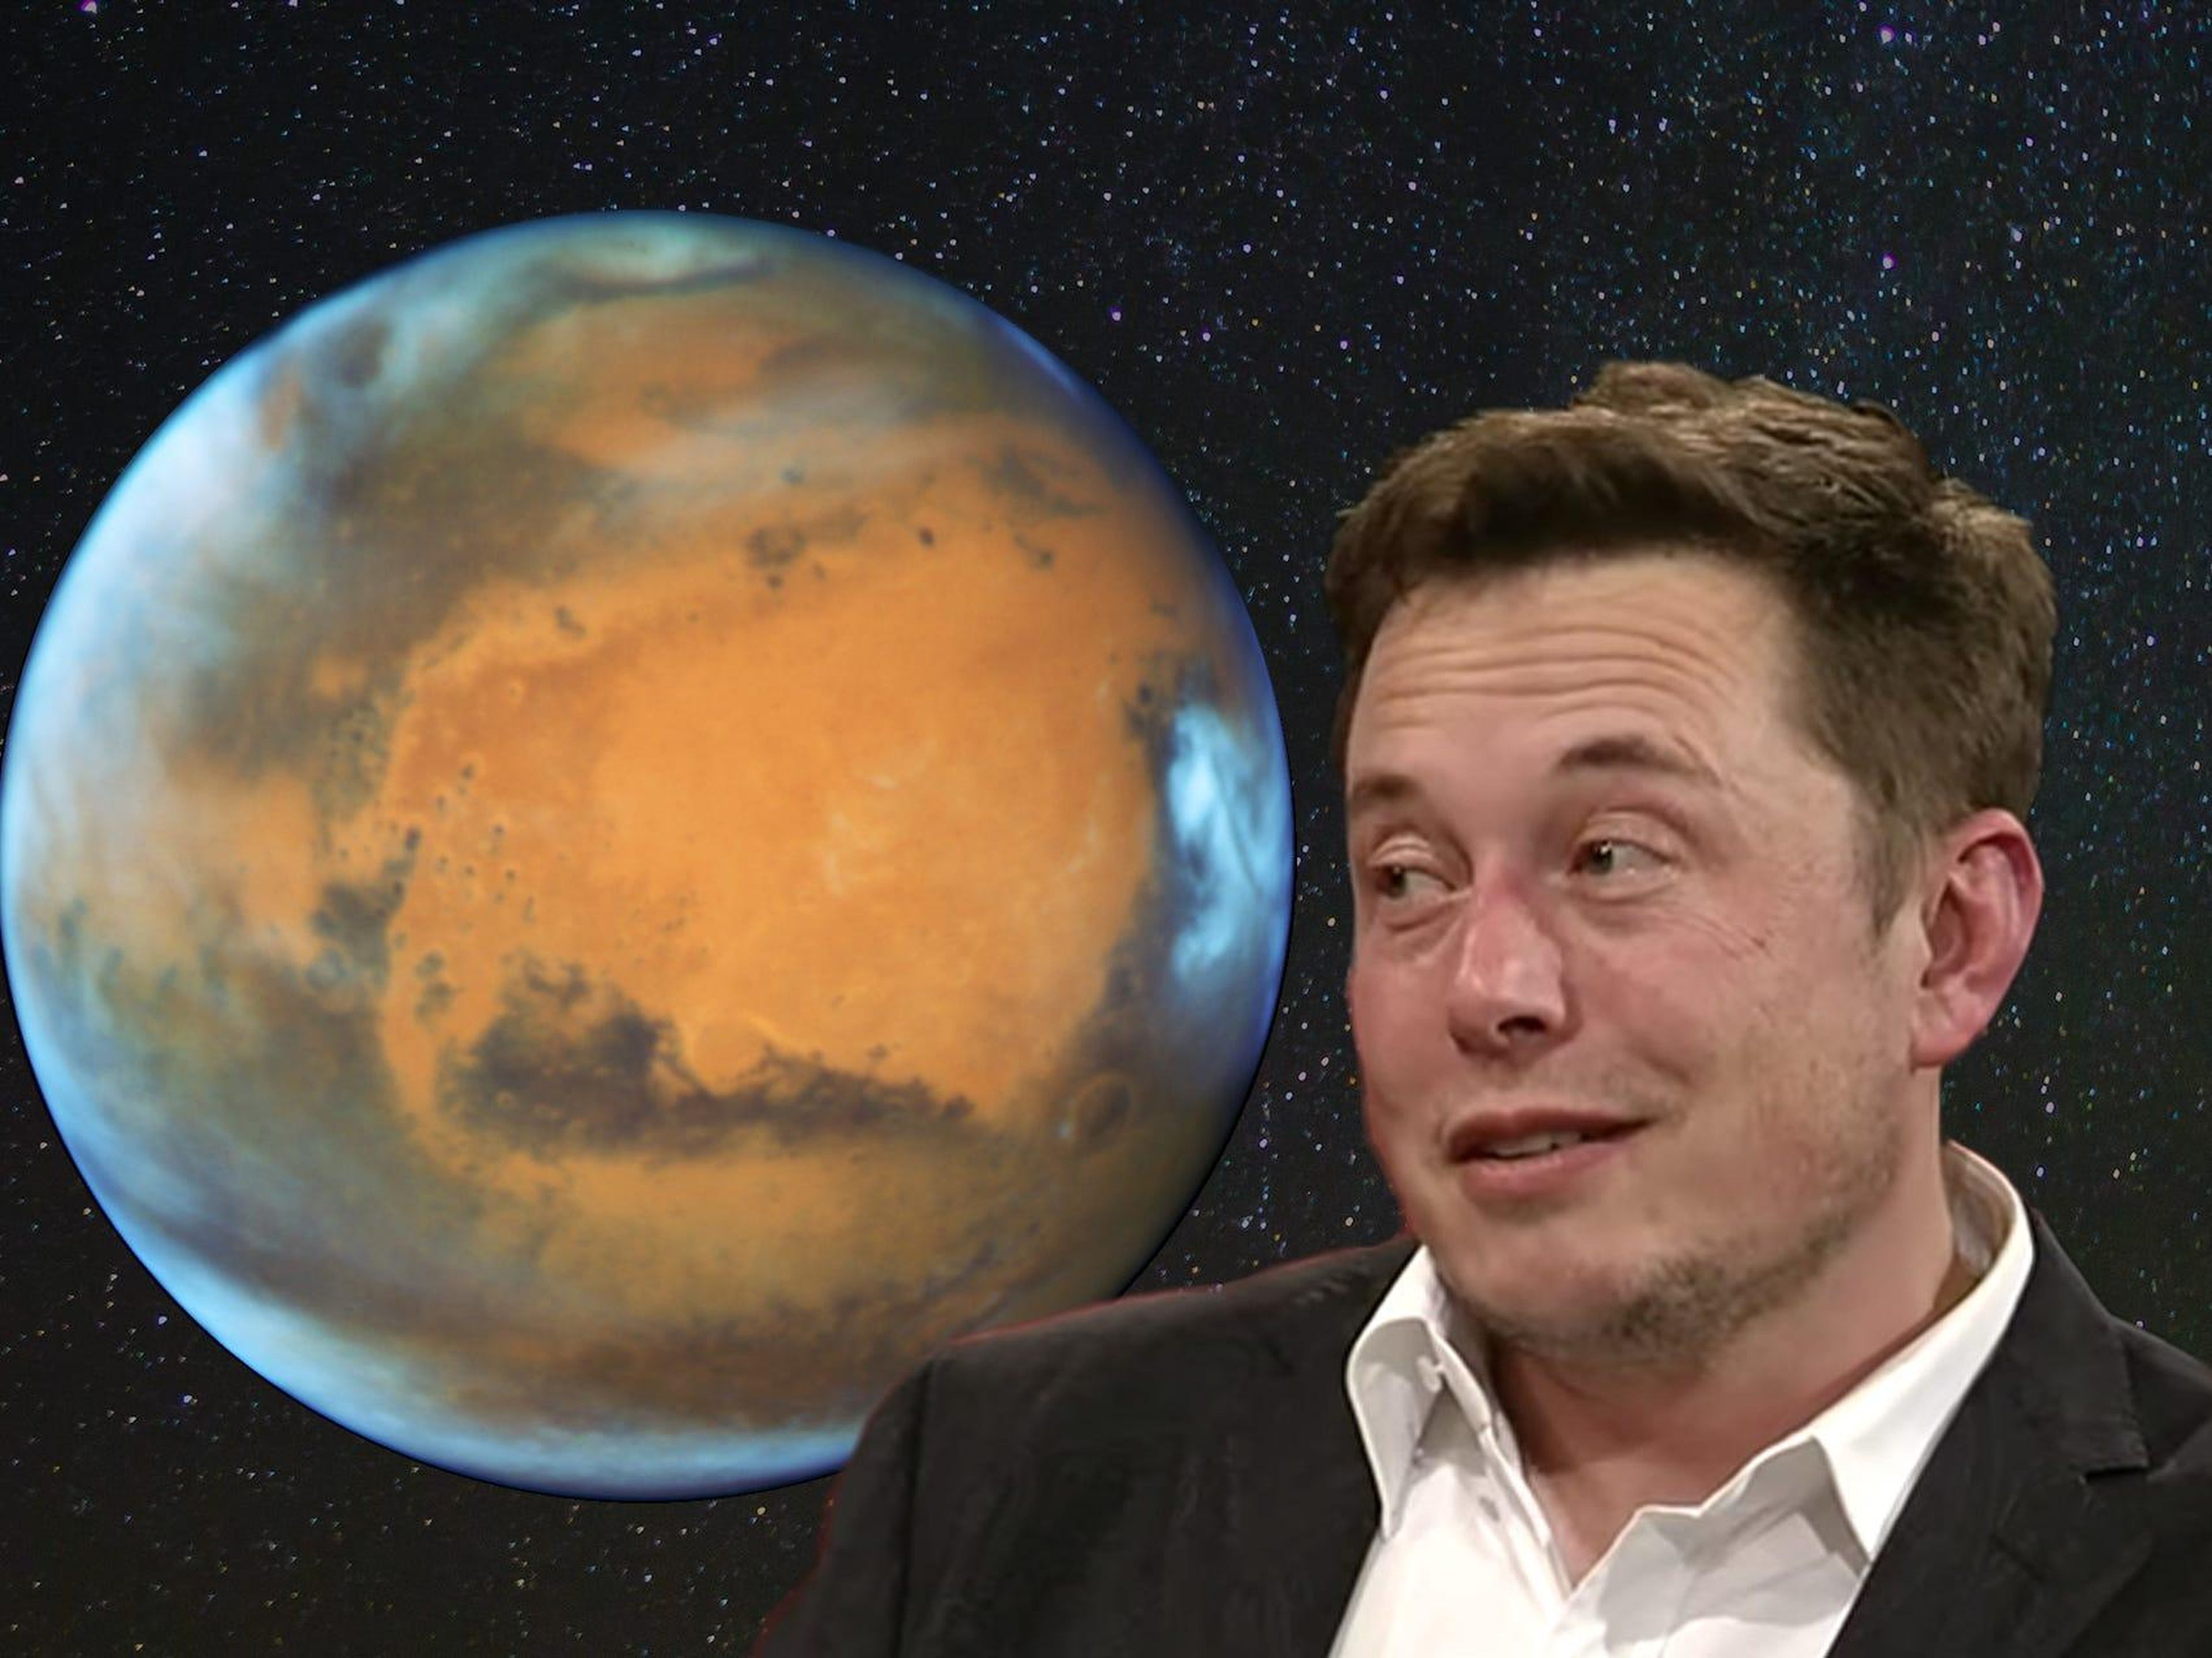 For a man who works 80 to 90 hours a week, Tesla and SpaceX CEO Elon Musk doesn't necessarily adhere to a strict diet. Musk has said he doesn't usually eat breakfast, but when he does, he'll eat a Mars bar — apt for a man who's